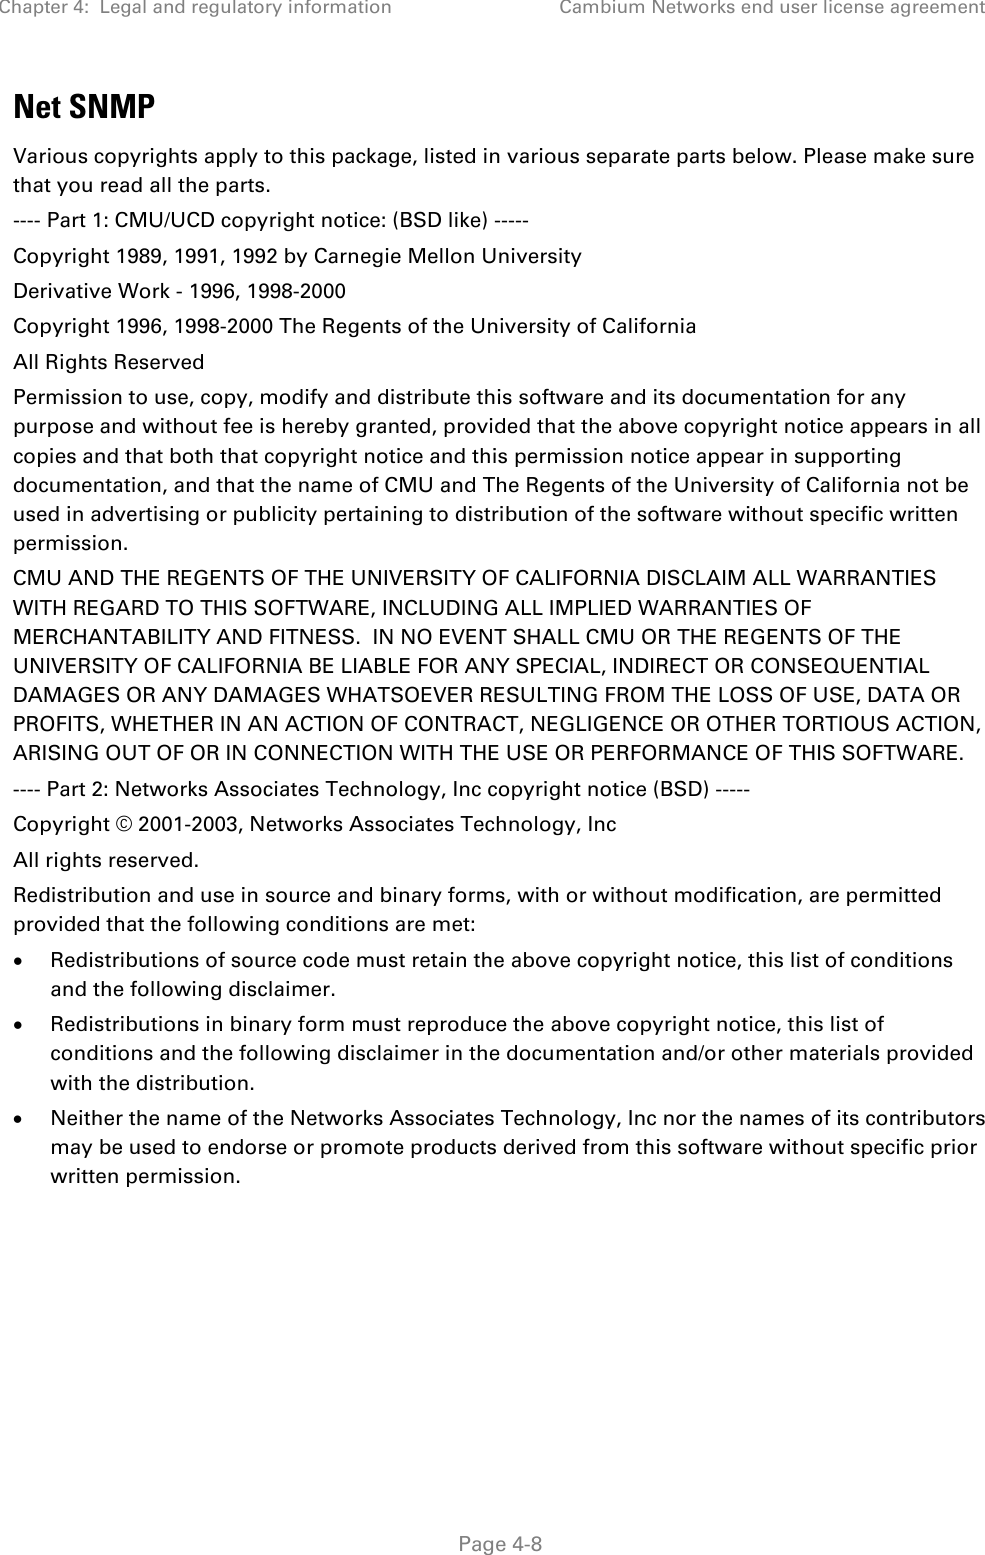 Chapter 4:  Legal and regulatory information Cambium Networks end user license agreement   Page 4-8 Net SNMP Various copyrights apply to this package, listed in various separate parts below. Please make sure that you read all the parts. ---- Part 1: CMU/UCD copyright notice: (BSD like) ----- Copyright 1989, 1991, 1992 by Carnegie Mellon University Derivative Work - 1996, 1998-2000 Copyright 1996, 1998-2000 The Regents of the University of California All Rights Reserved Permission to use, copy, modify and distribute this software and its documentation for any purpose and without fee is hereby granted, provided that the above copyright notice appears in all copies and that both that copyright notice and this permission notice appear in supporting documentation, and that the name of CMU and The Regents of the University of California not be used in advertising or publicity pertaining to distribution of the software without specific written permission. CMU AND THE REGENTS OF THE UNIVERSITY OF CALIFORNIA DISCLAIM ALL WARRANTIES WITH REGARD TO THIS SOFTWARE, INCLUDING ALL IMPLIED WARRANTIES OF MERCHANTABILITY AND FITNESS.  IN NO EVENT SHALL CMU OR THE REGENTS OF THE UNIVERSITY OF CALIFORNIA BE LIABLE FOR ANY SPECIAL, INDIRECT OR CONSEQUENTIAL DAMAGES OR ANY DAMAGES WHATSOEVER RESULTING FROM THE LOSS OF USE, DATA OR PROFITS, WHETHER IN AN ACTION OF CONTRACT, NEGLIGENCE OR OTHER TORTIOUS ACTION, ARISING OUT OF OR IN CONNECTION WITH THE USE OR PERFORMANCE OF THIS SOFTWARE. ---- Part 2: Networks Associates Technology, Inc copyright notice (BSD) ----- Copyright © 2001-2003, Networks Associates Technology, Inc All rights reserved. Redistribution and use in source and binary forms, with or without modification, are permitted provided that the following conditions are met: • Redistributions of source code must retain the above copyright notice, this list of conditions and the following disclaimer. • Redistributions in binary form must reproduce the above copyright notice, this list of conditions and the following disclaimer in the documentation and/or other materials provided with the distribution. • Neither the name of the Networks Associates Technology, Inc nor the names of its contributors may be used to endorse or promote products derived from this software without specific prior written permission. 